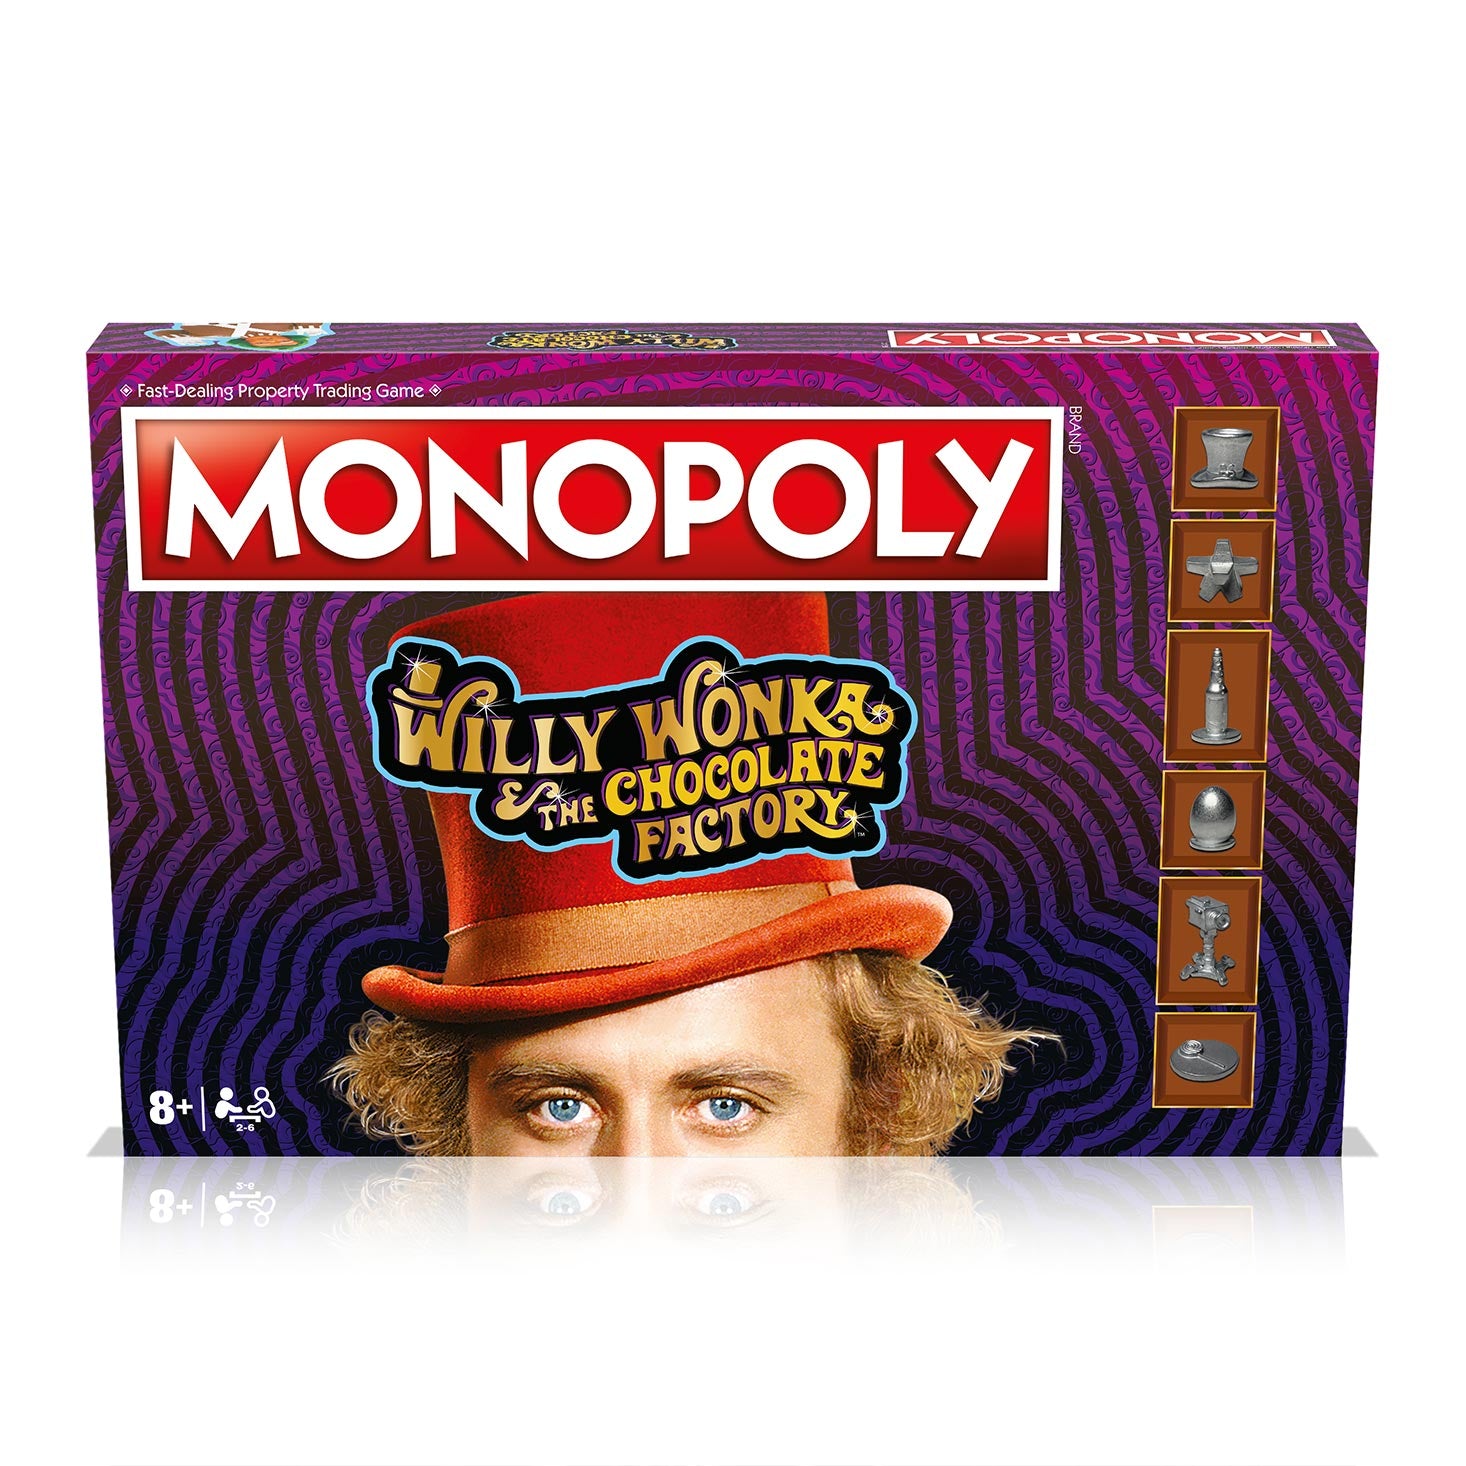 Willy Wonka Monopoly game from the film Willy Wonka and the Chocolate Factory by Roald Dahl